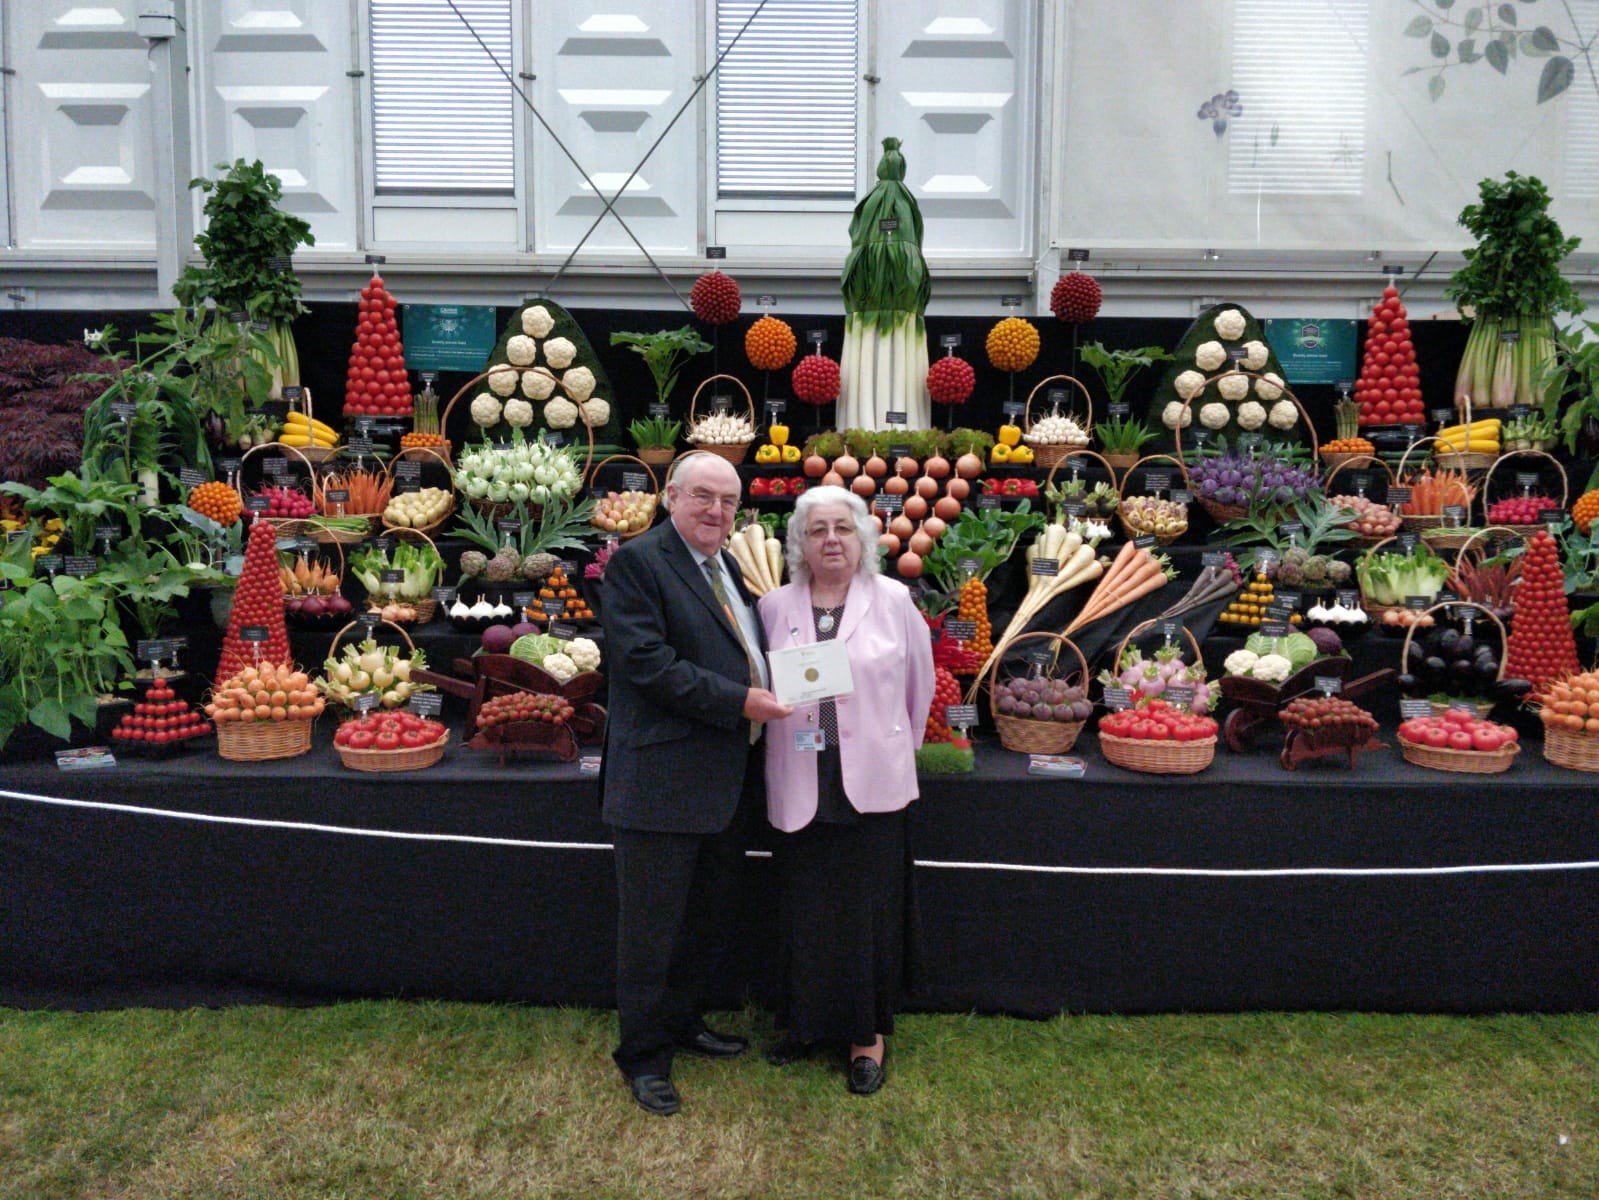 Medwyn and Gwenda Williams pose in front of their award-winning display at the 2019 Chelsea Flower Show